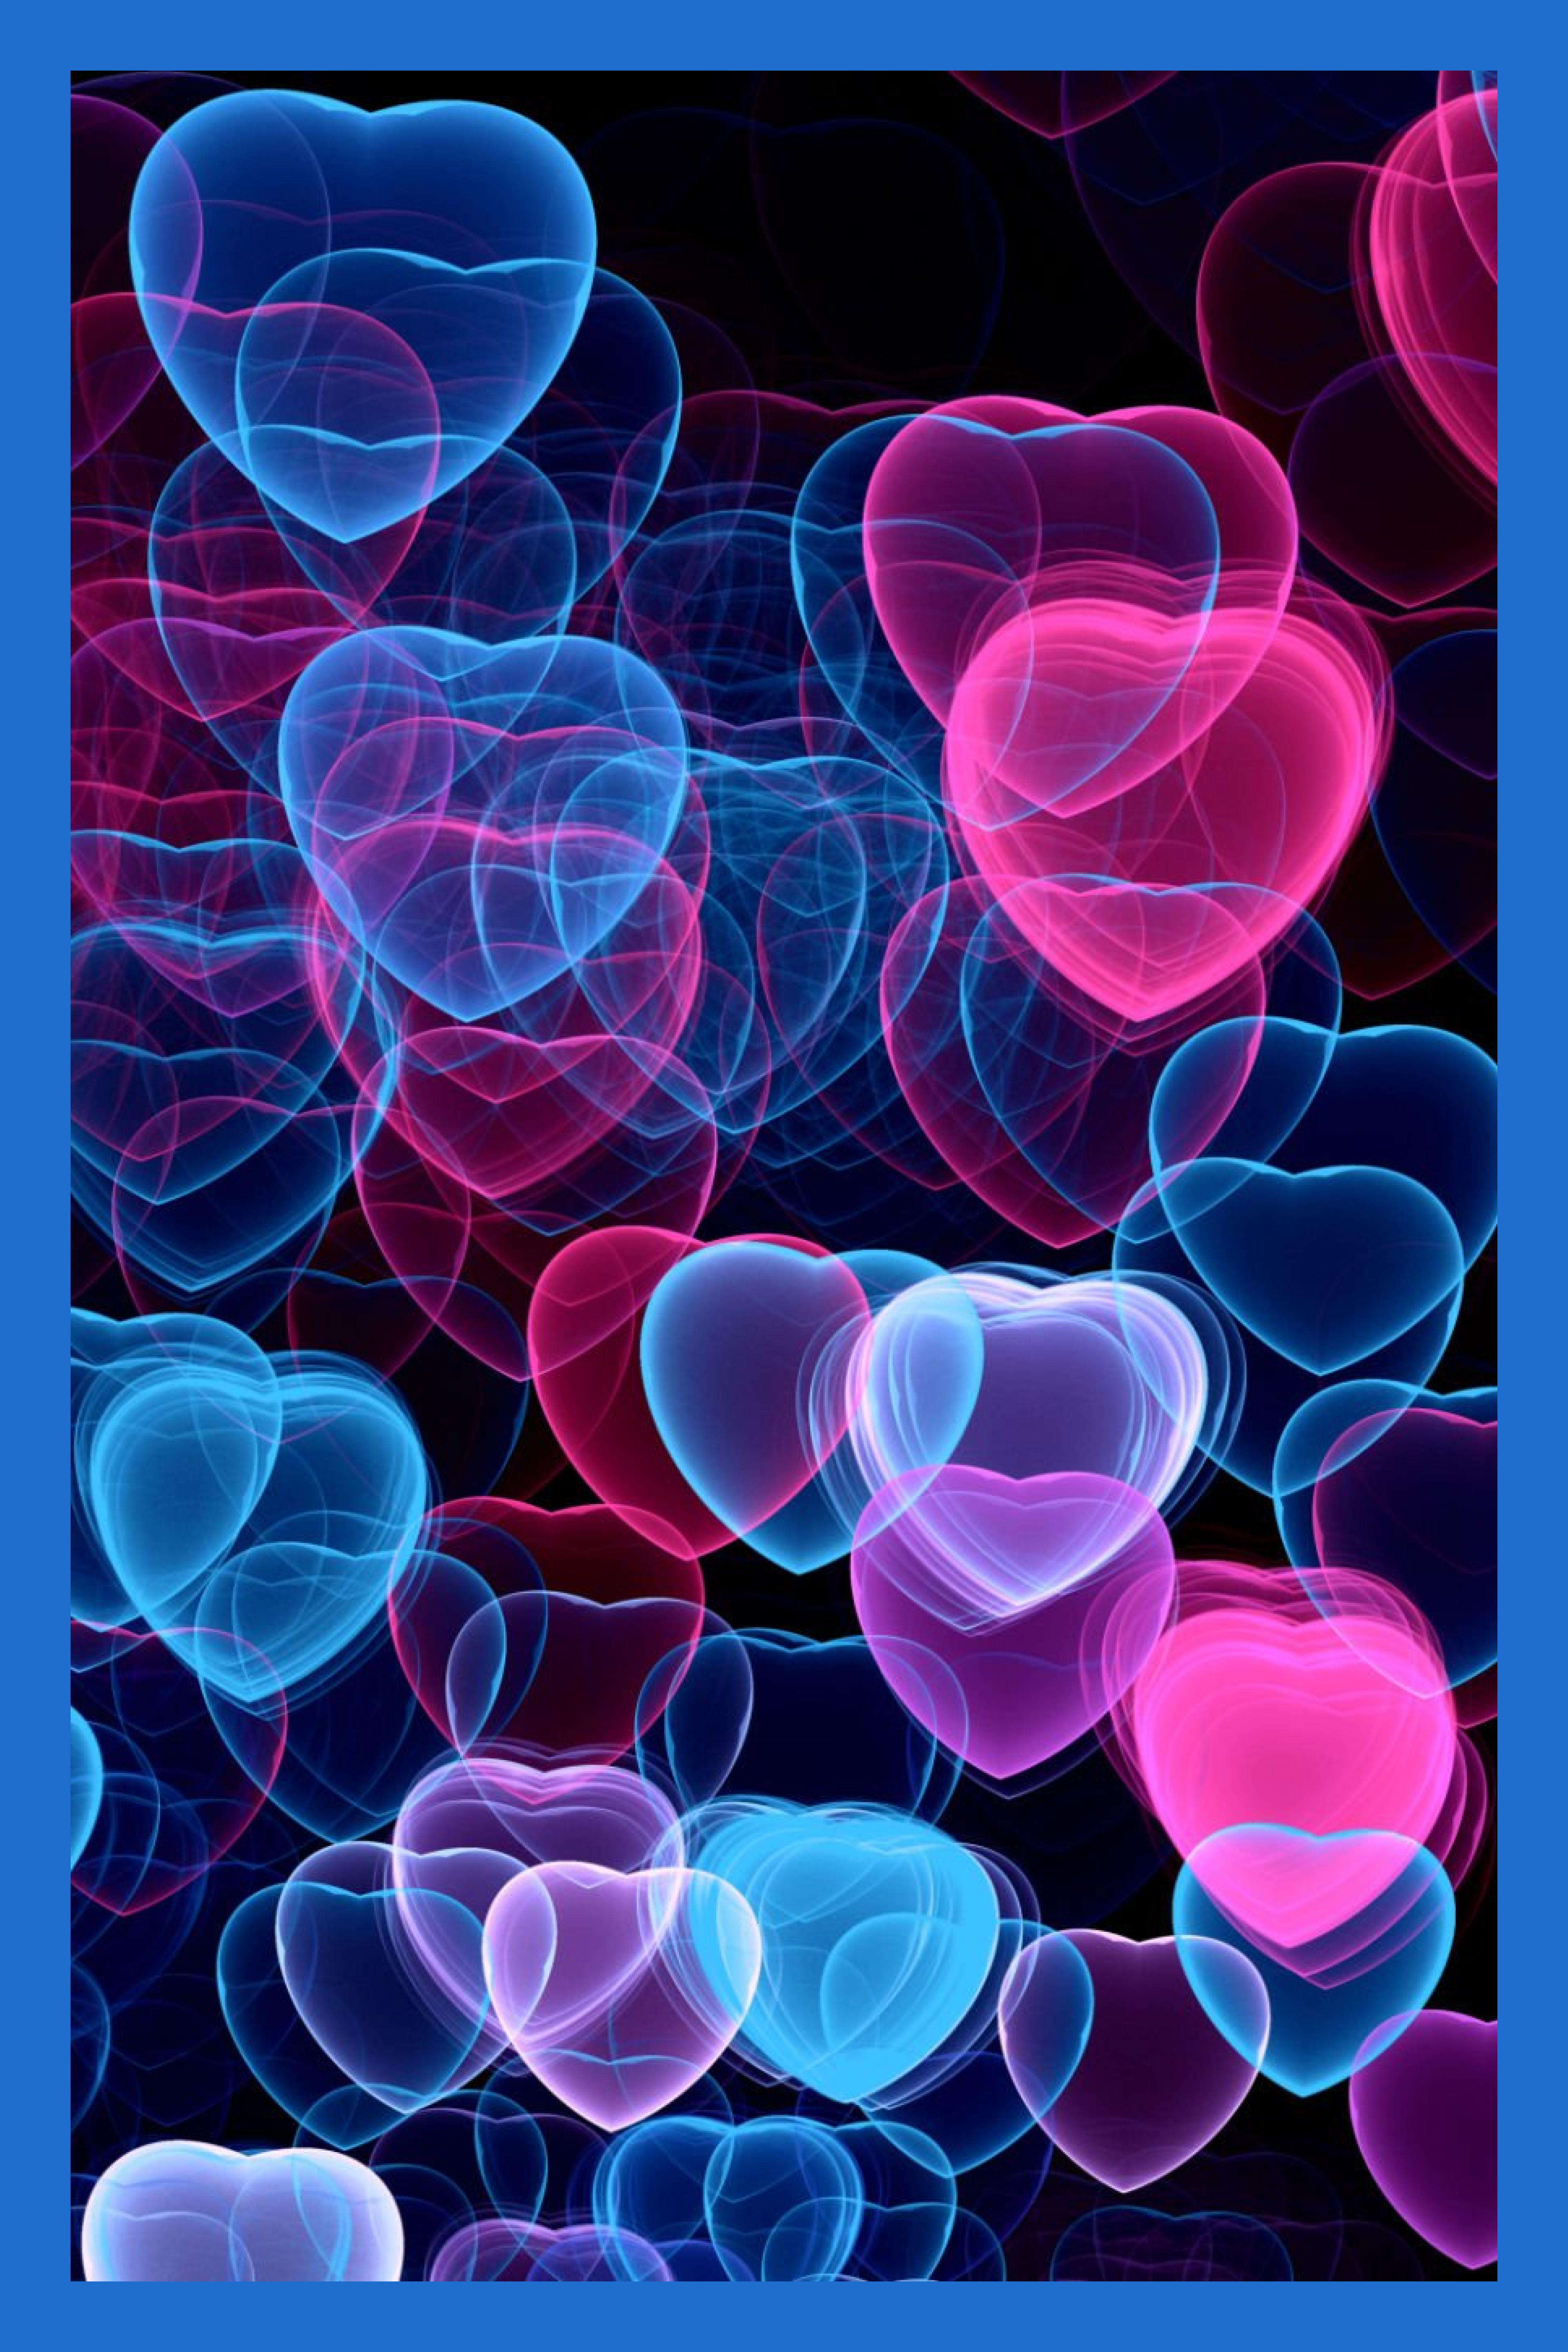 Neon hearts in red, violet, and blue colors.